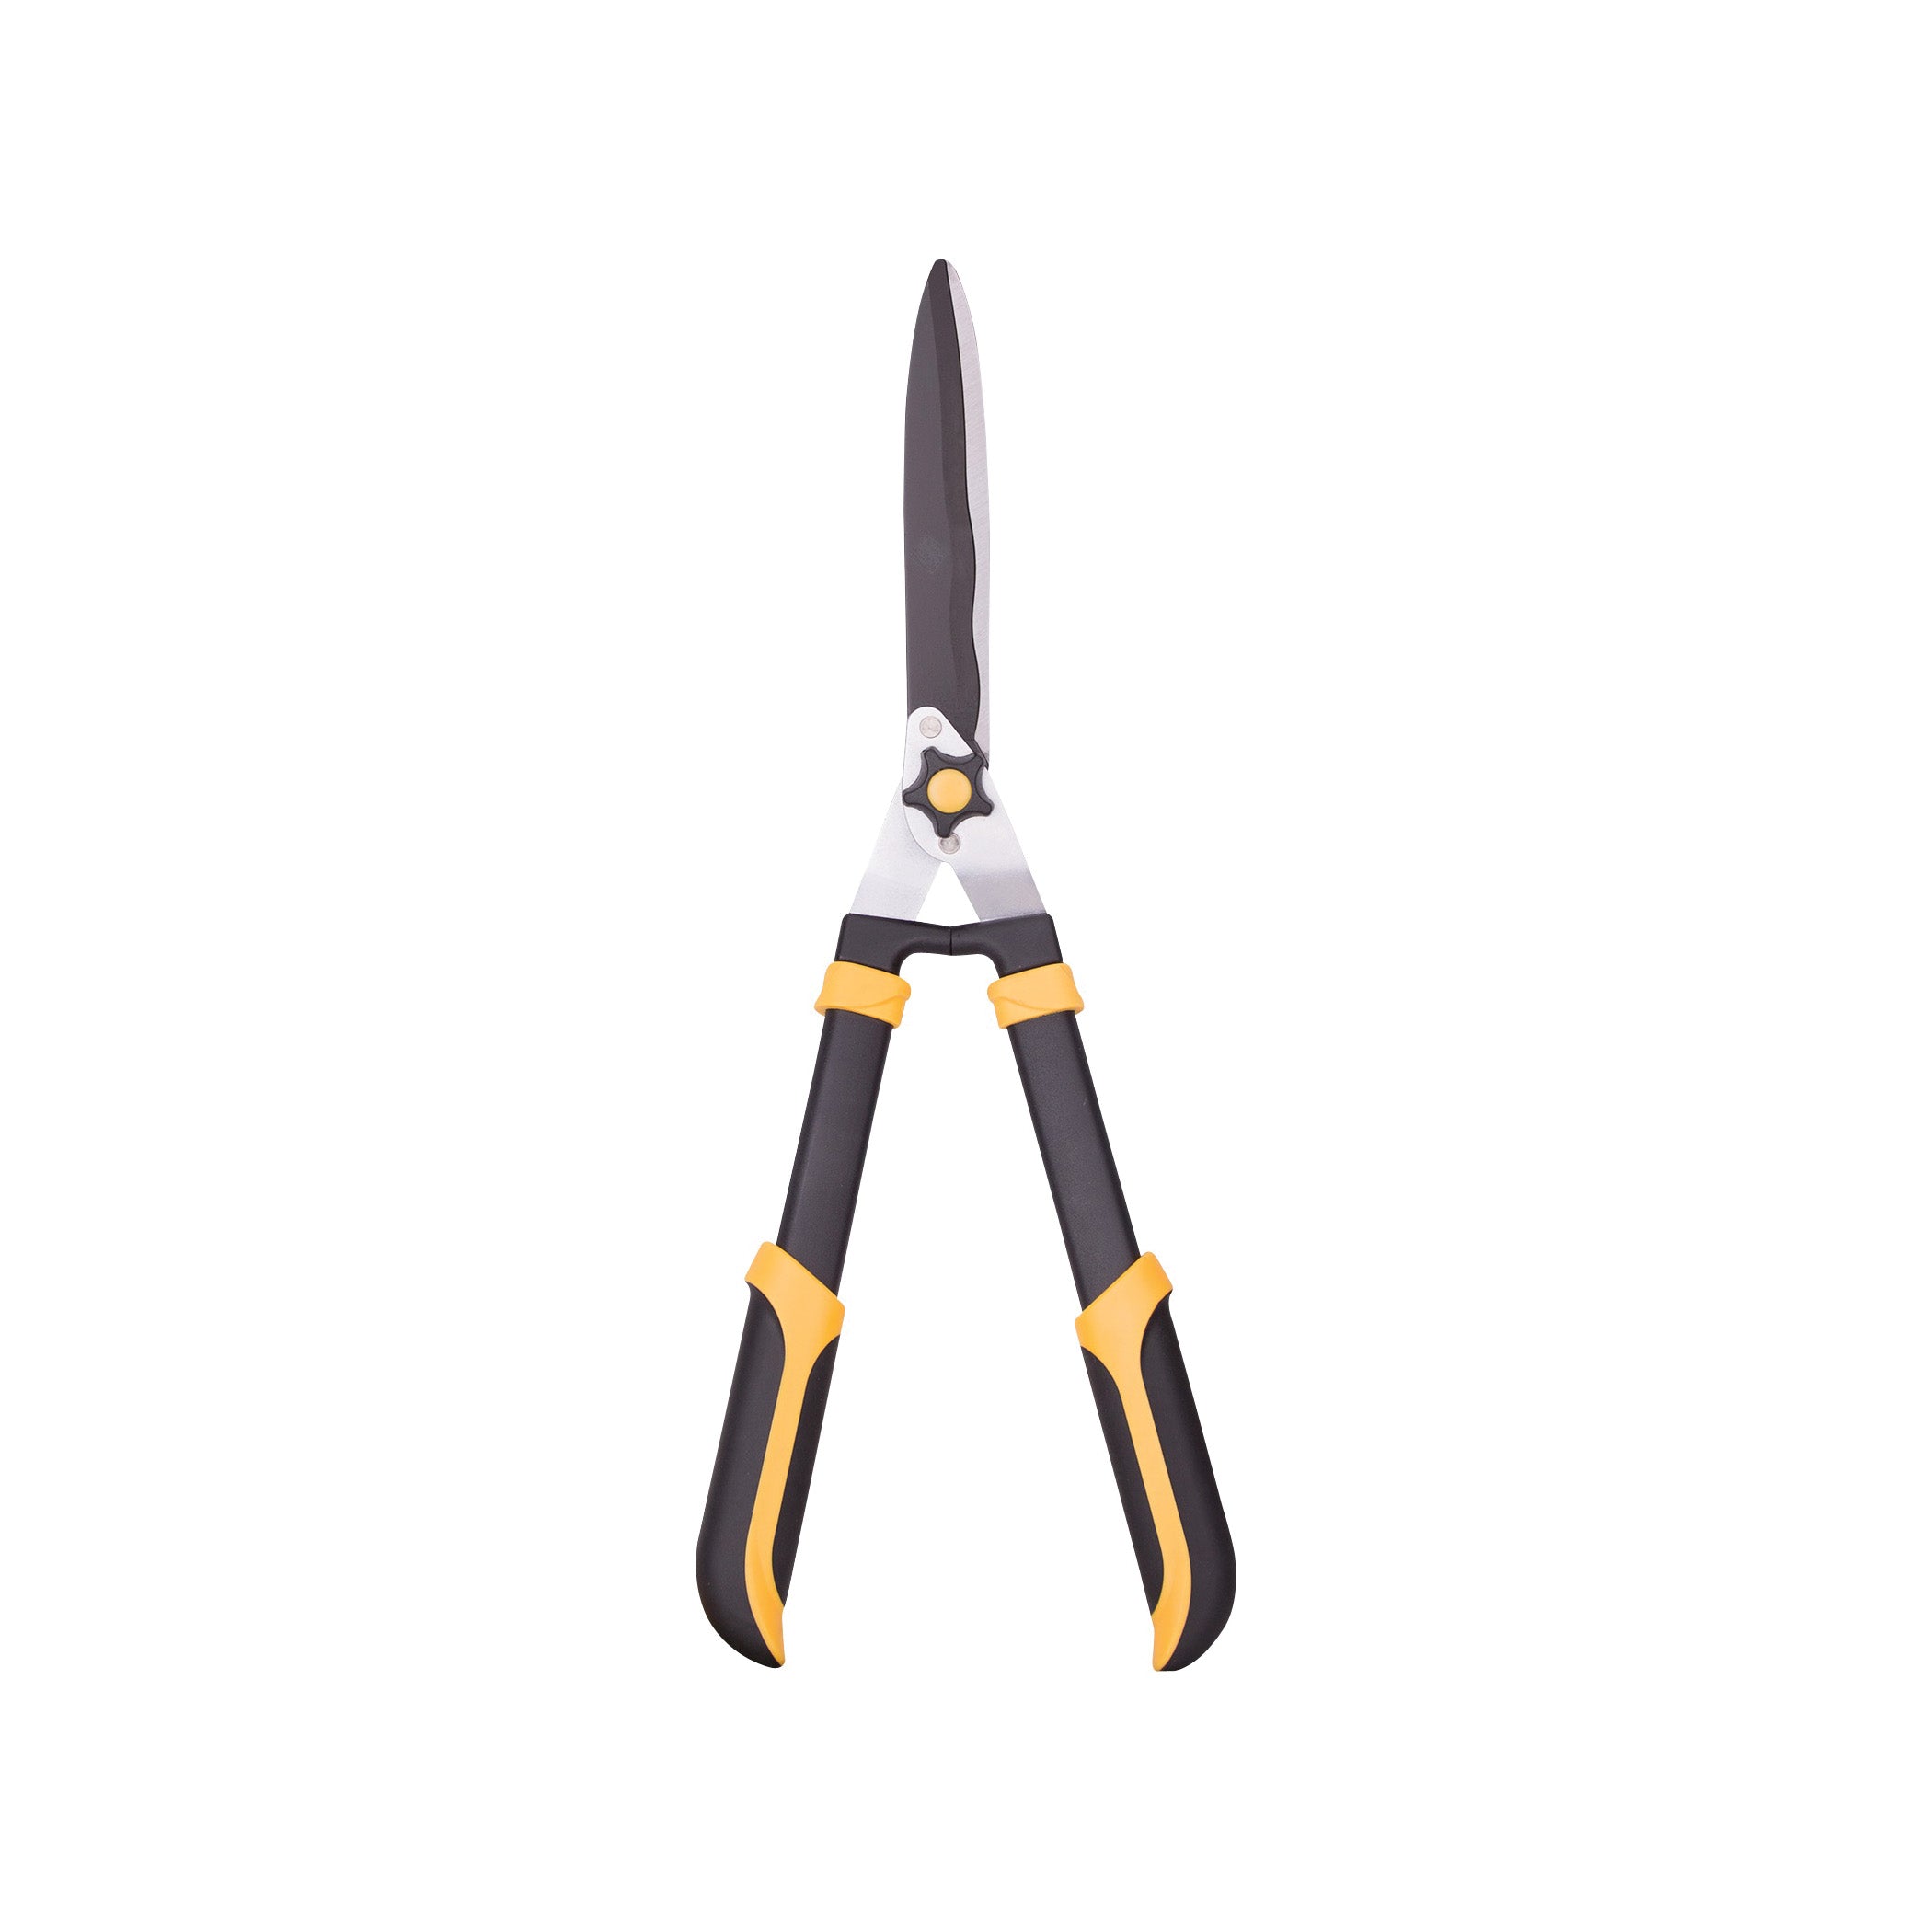 Landscapers Select Deluxe Hedge Shears - 22